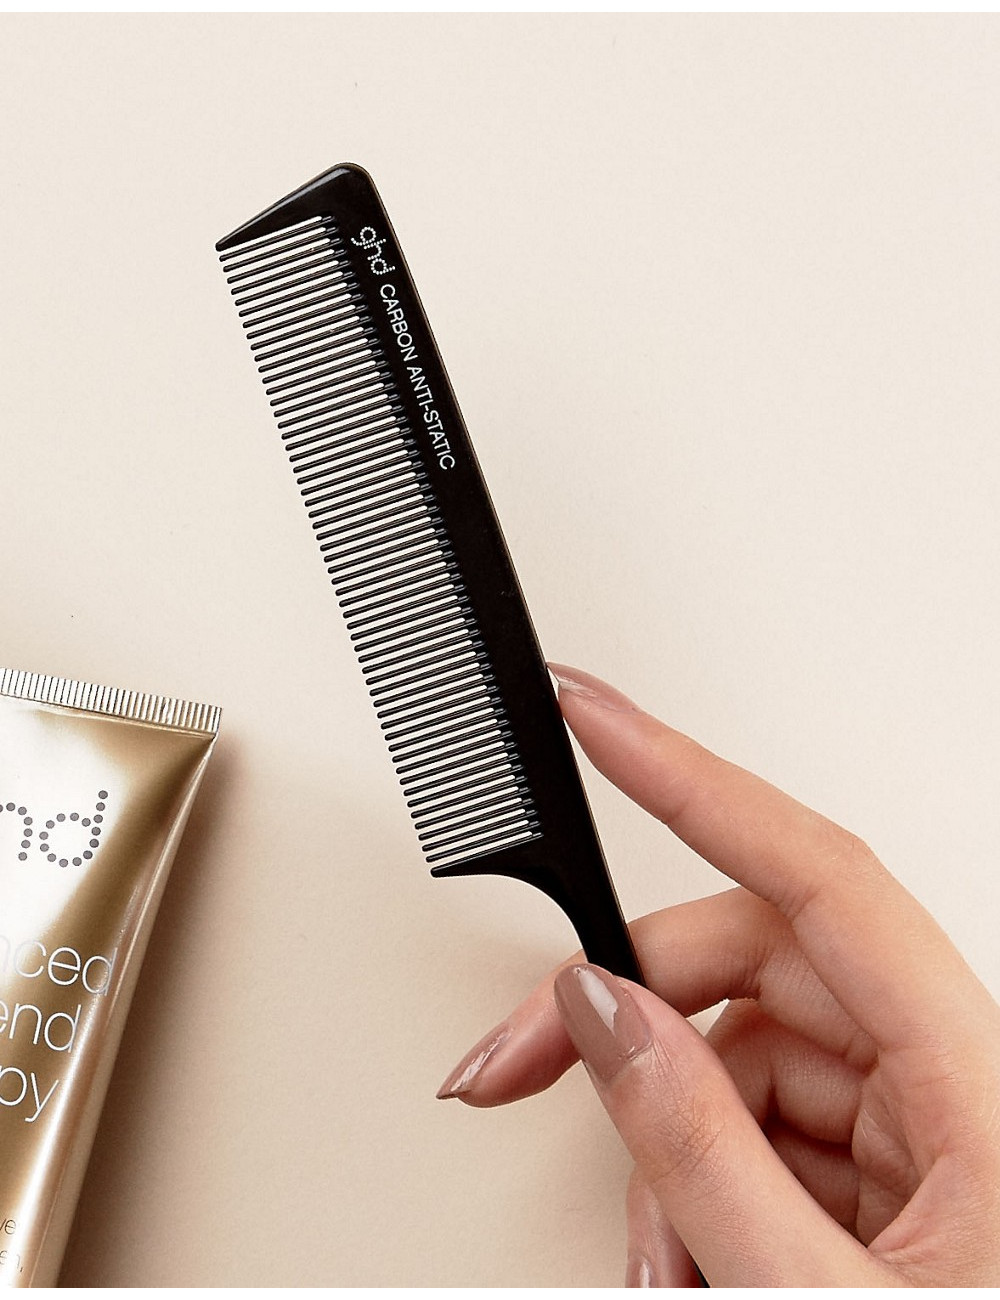 ghd Carbon Tail Comb